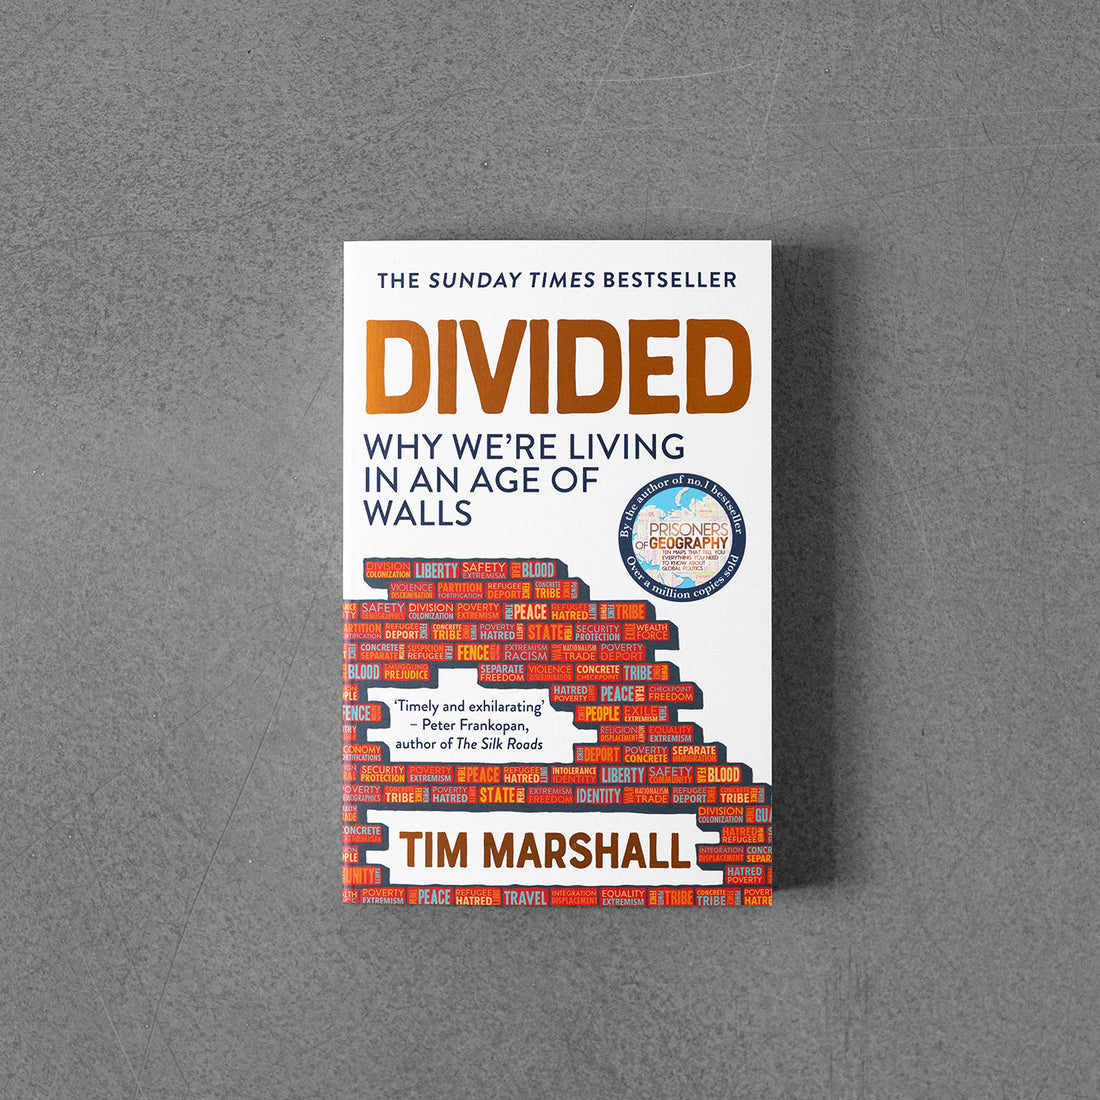 Divided: Why We're Living in an Age of Walls. Tim Marshall